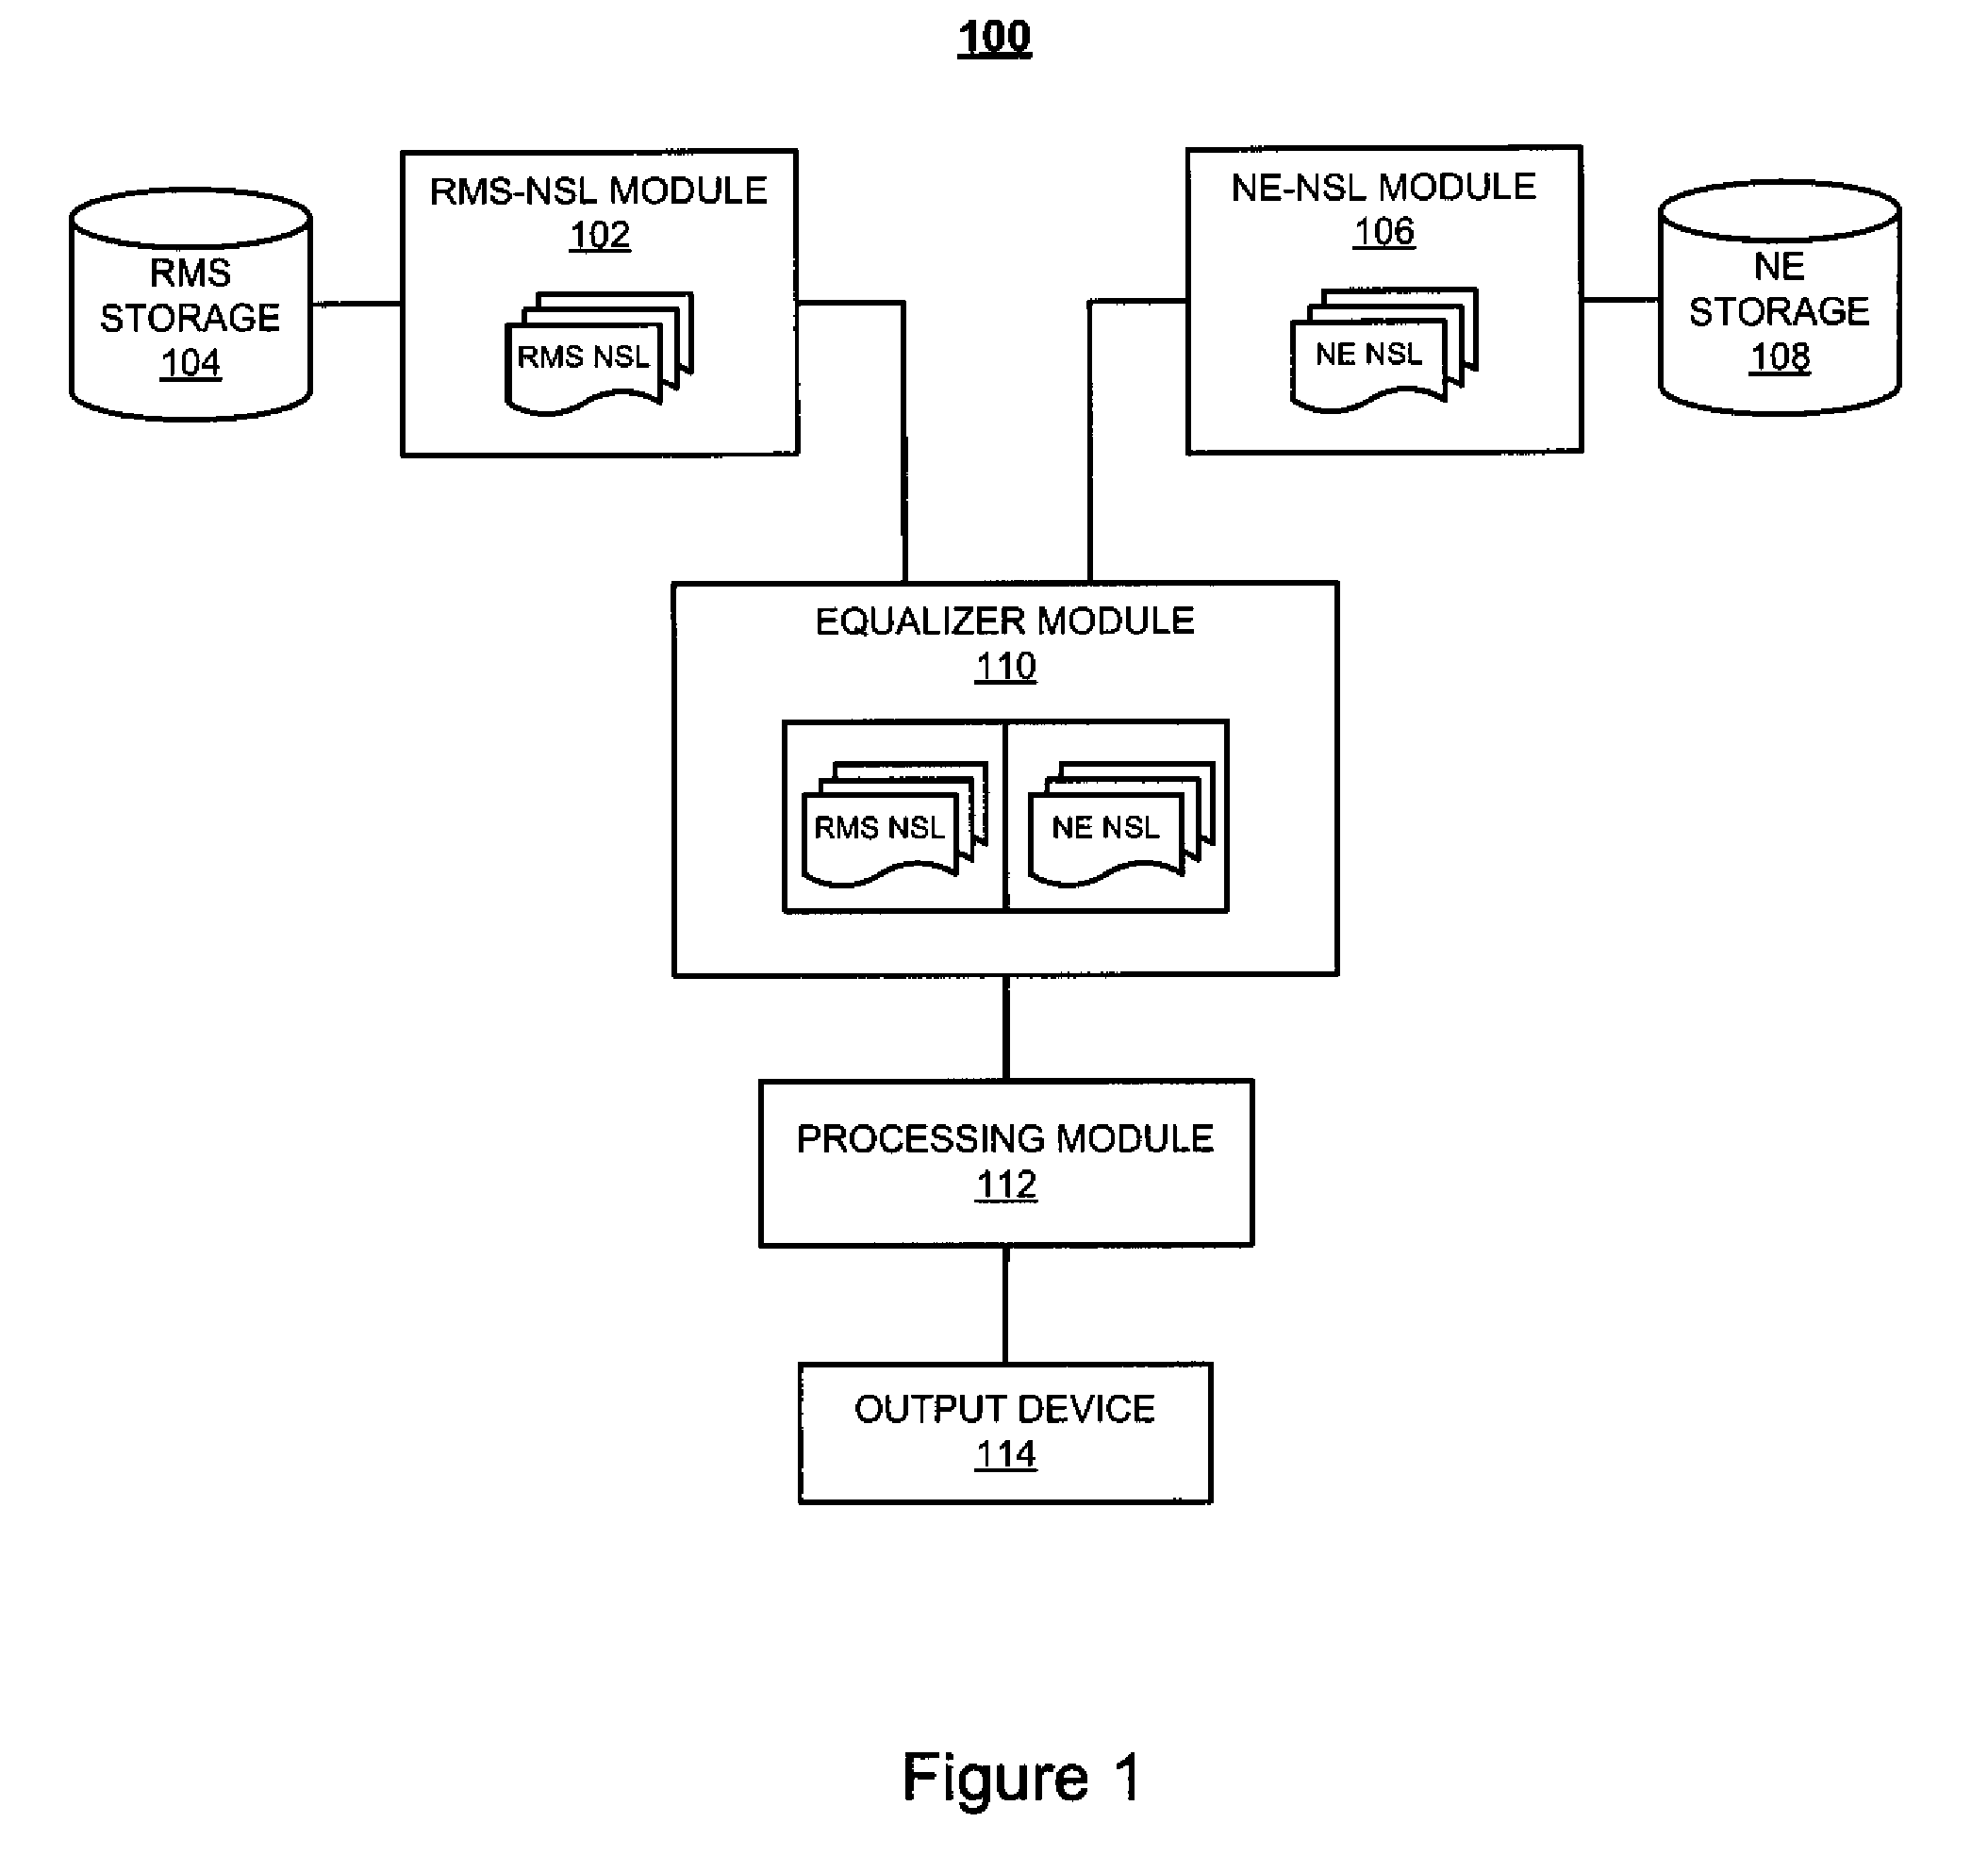 System and method for providing a normalized security list